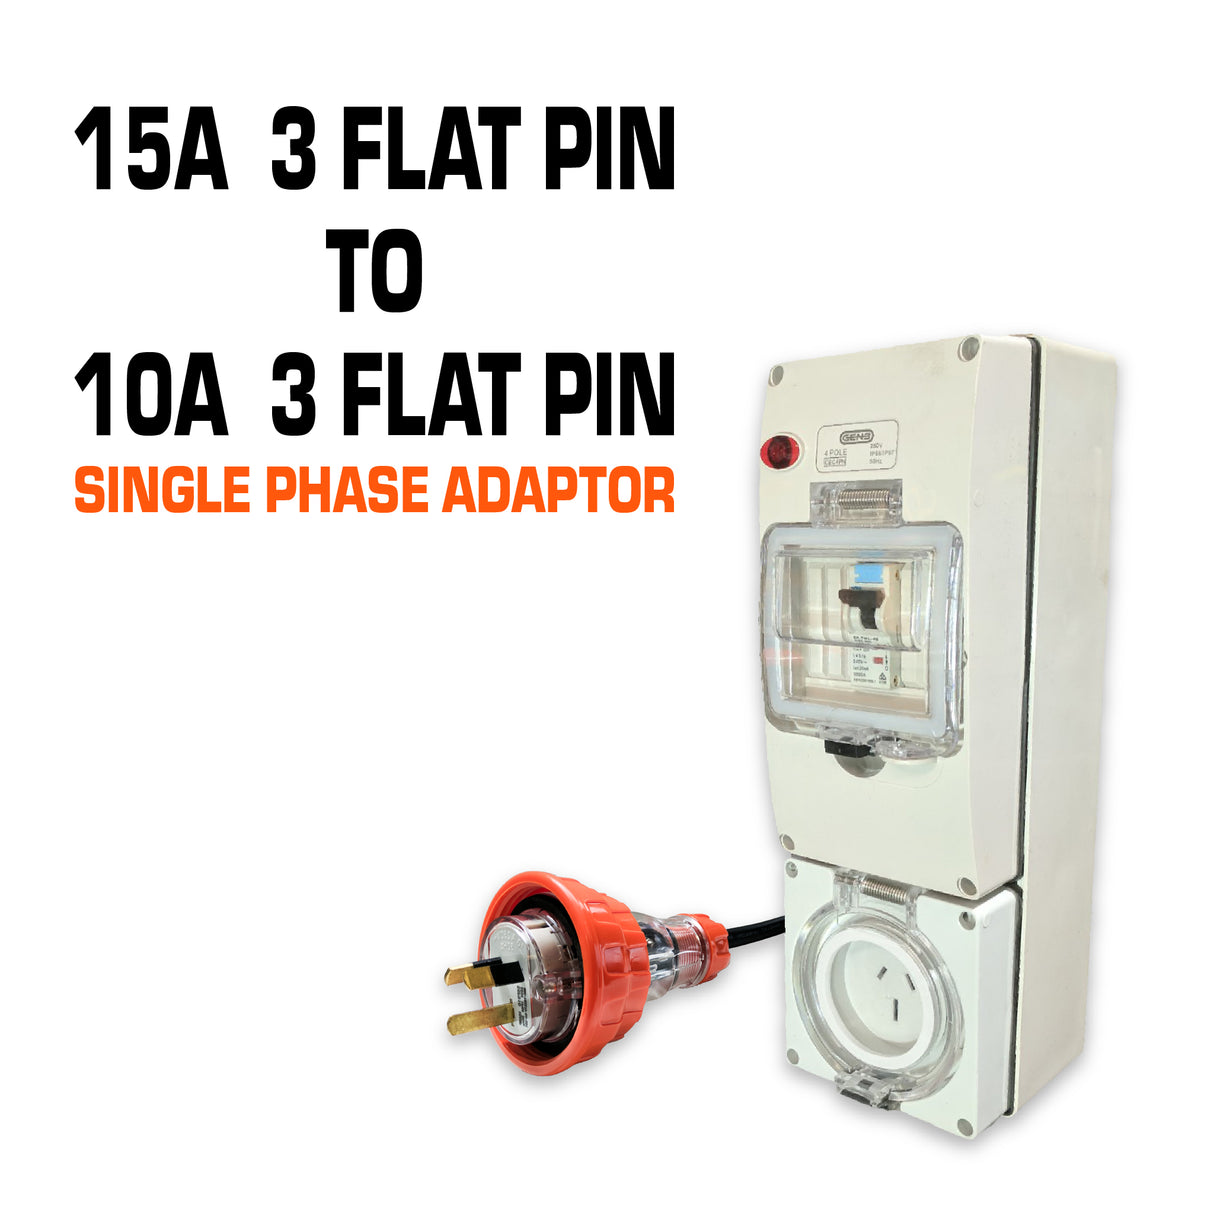 15A 1 Phase to 10A Flat Pin Single Phase